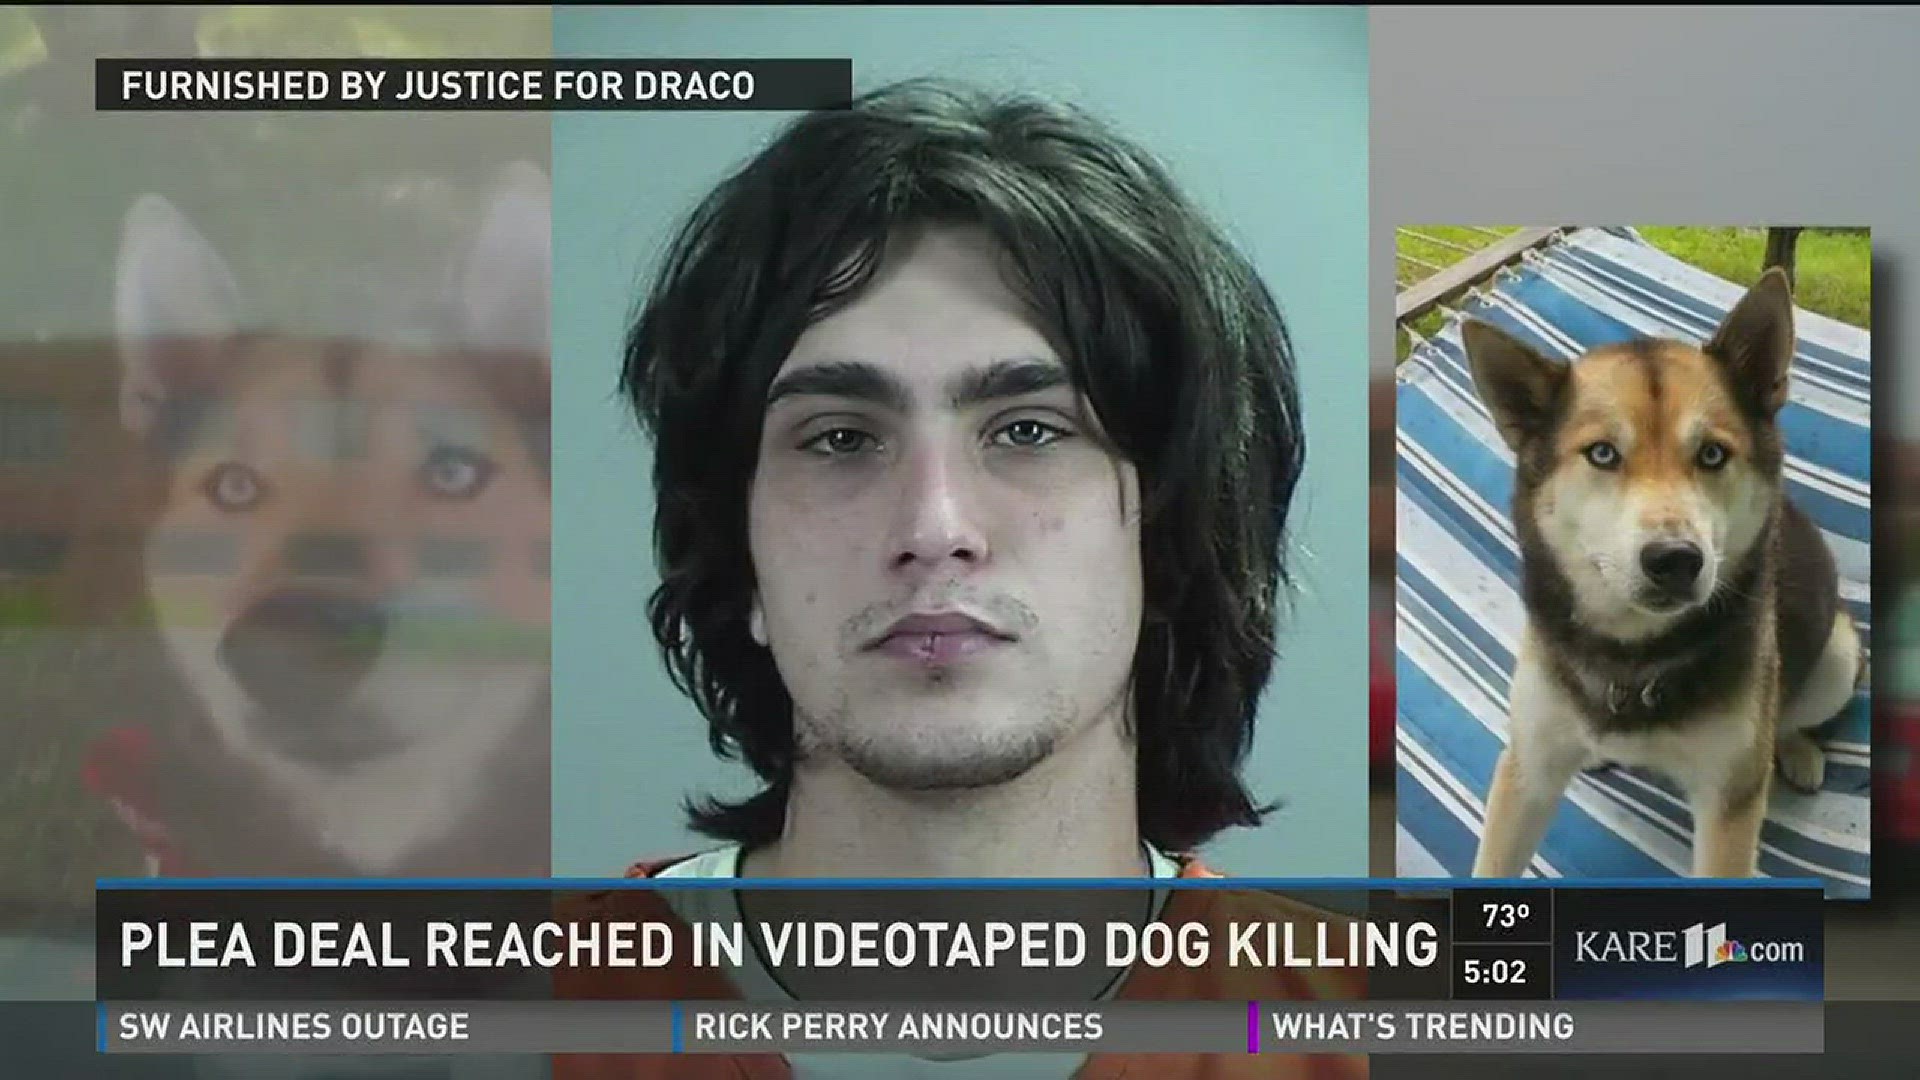 Plea deal reached in videotaped dog killing